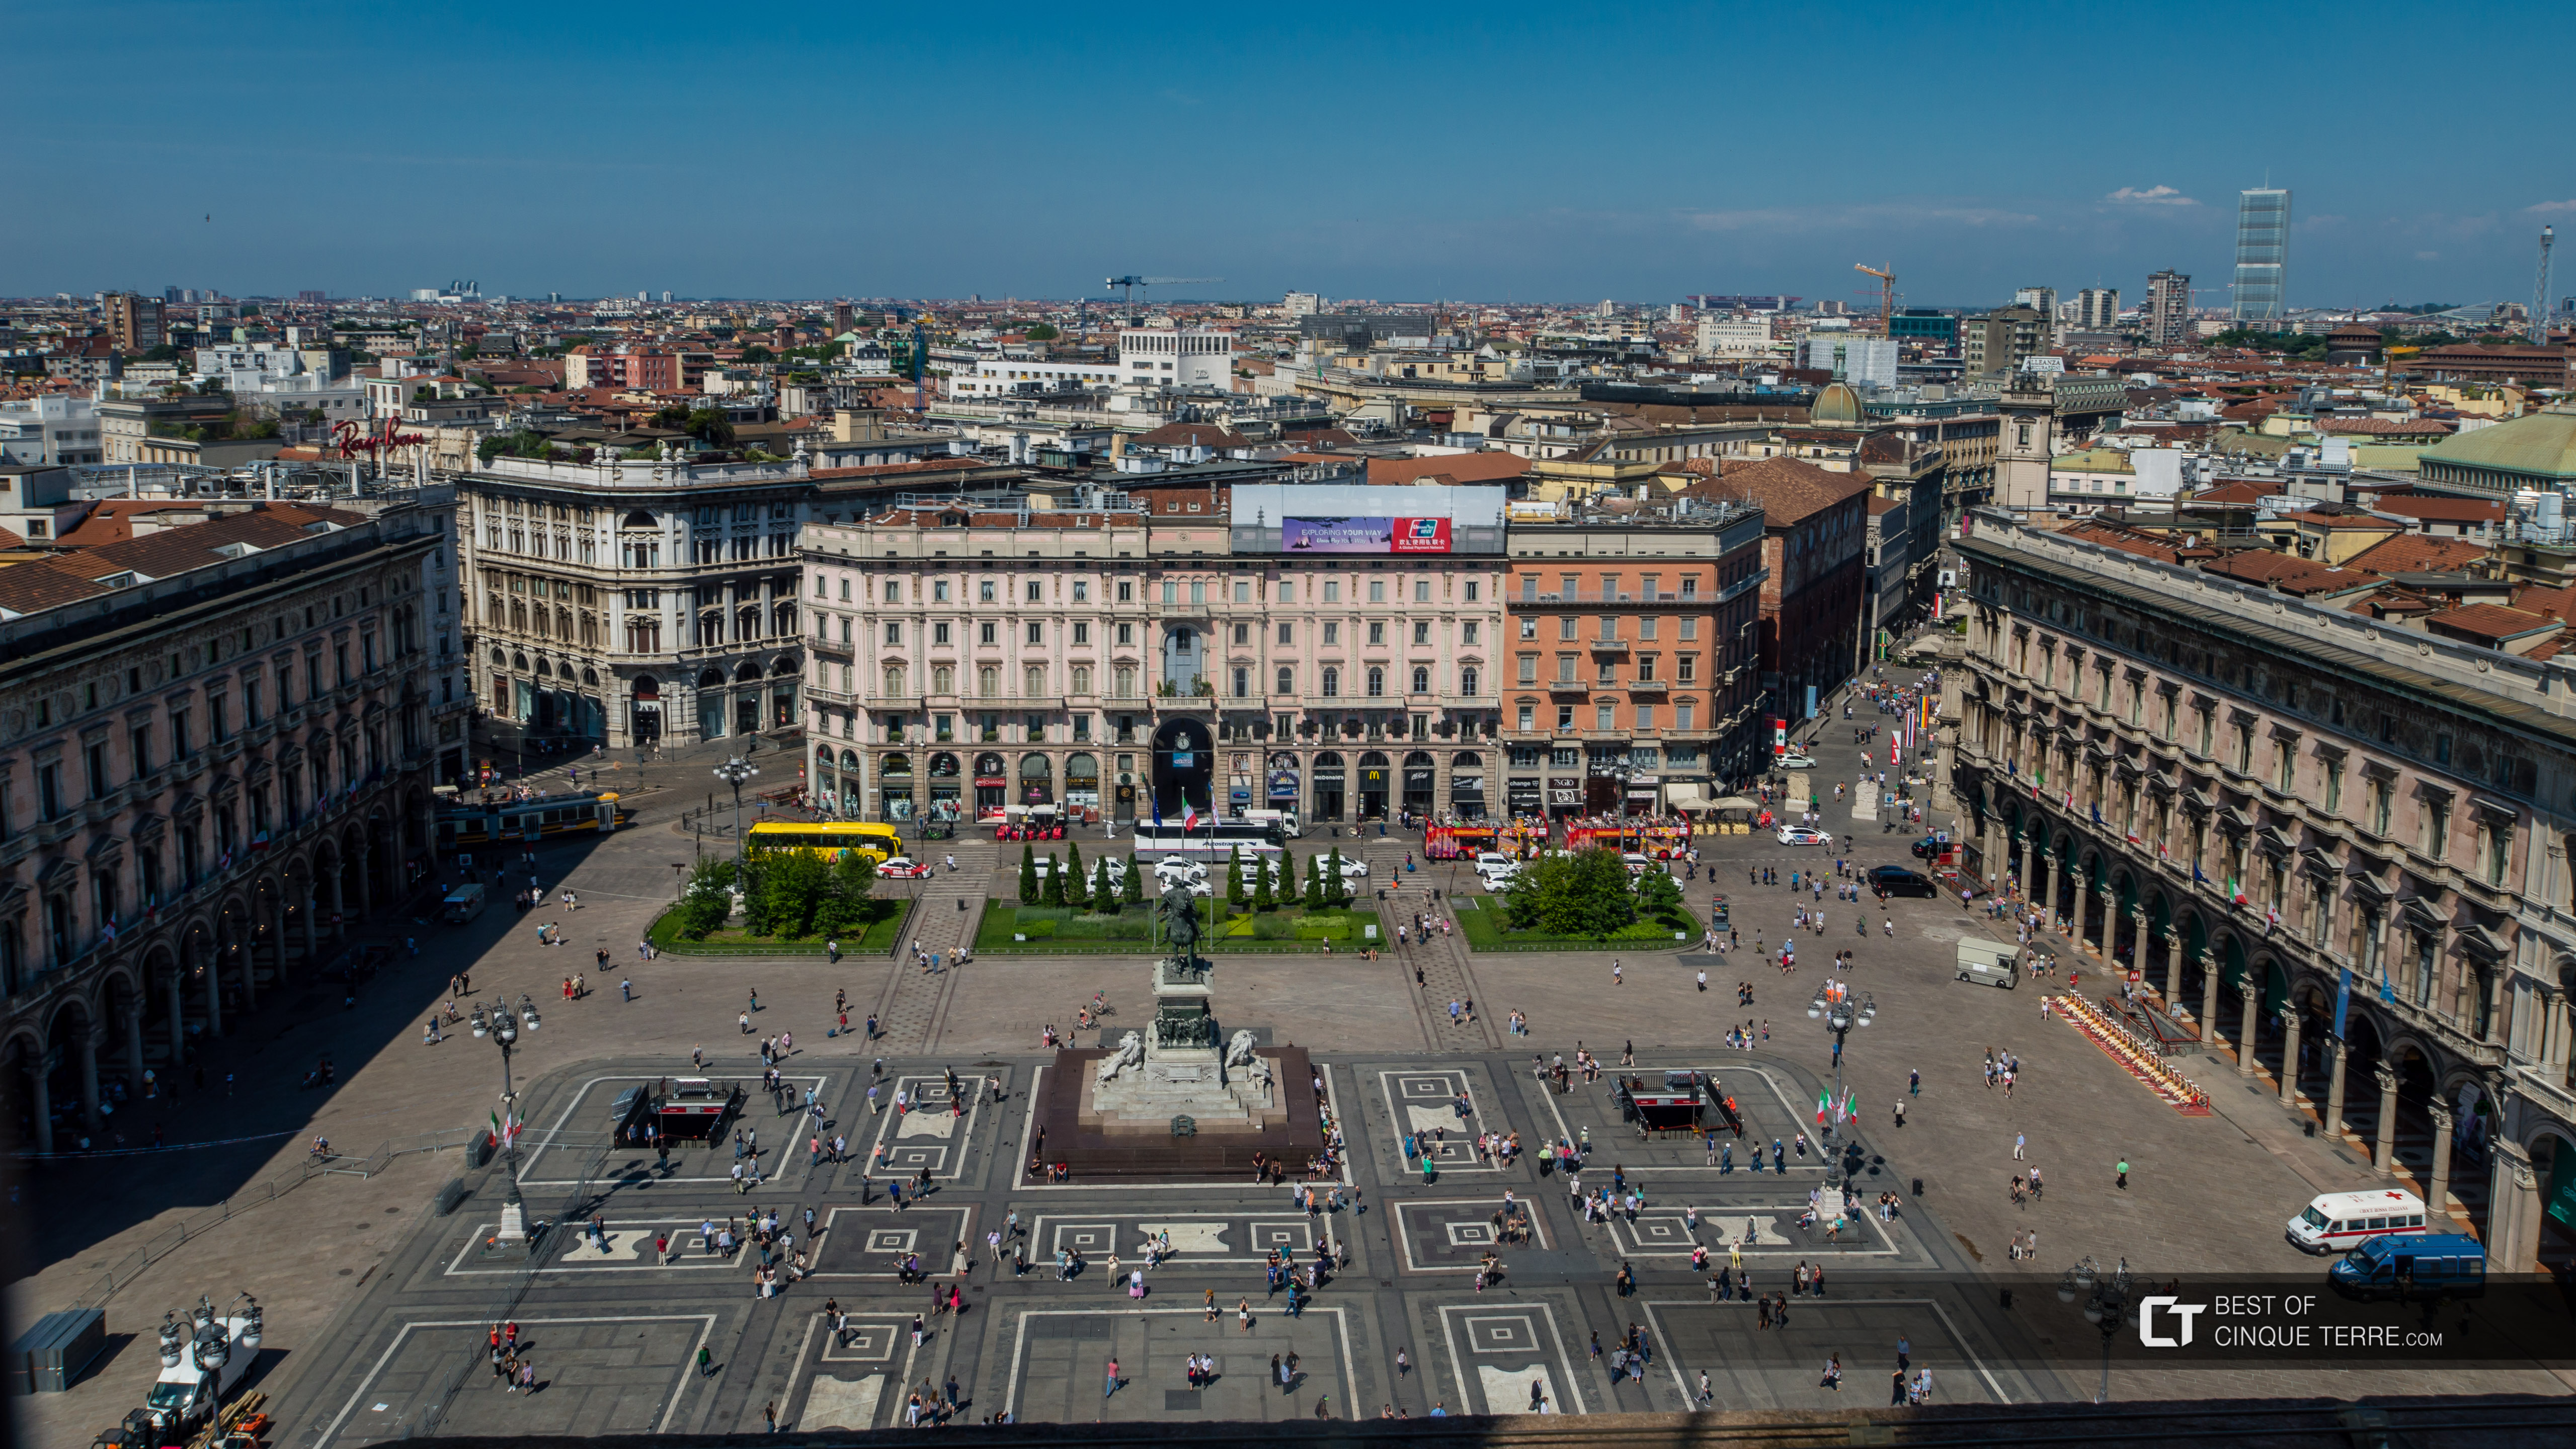 Piazza Duomo from the roof of the cathedral, Milan, Italy